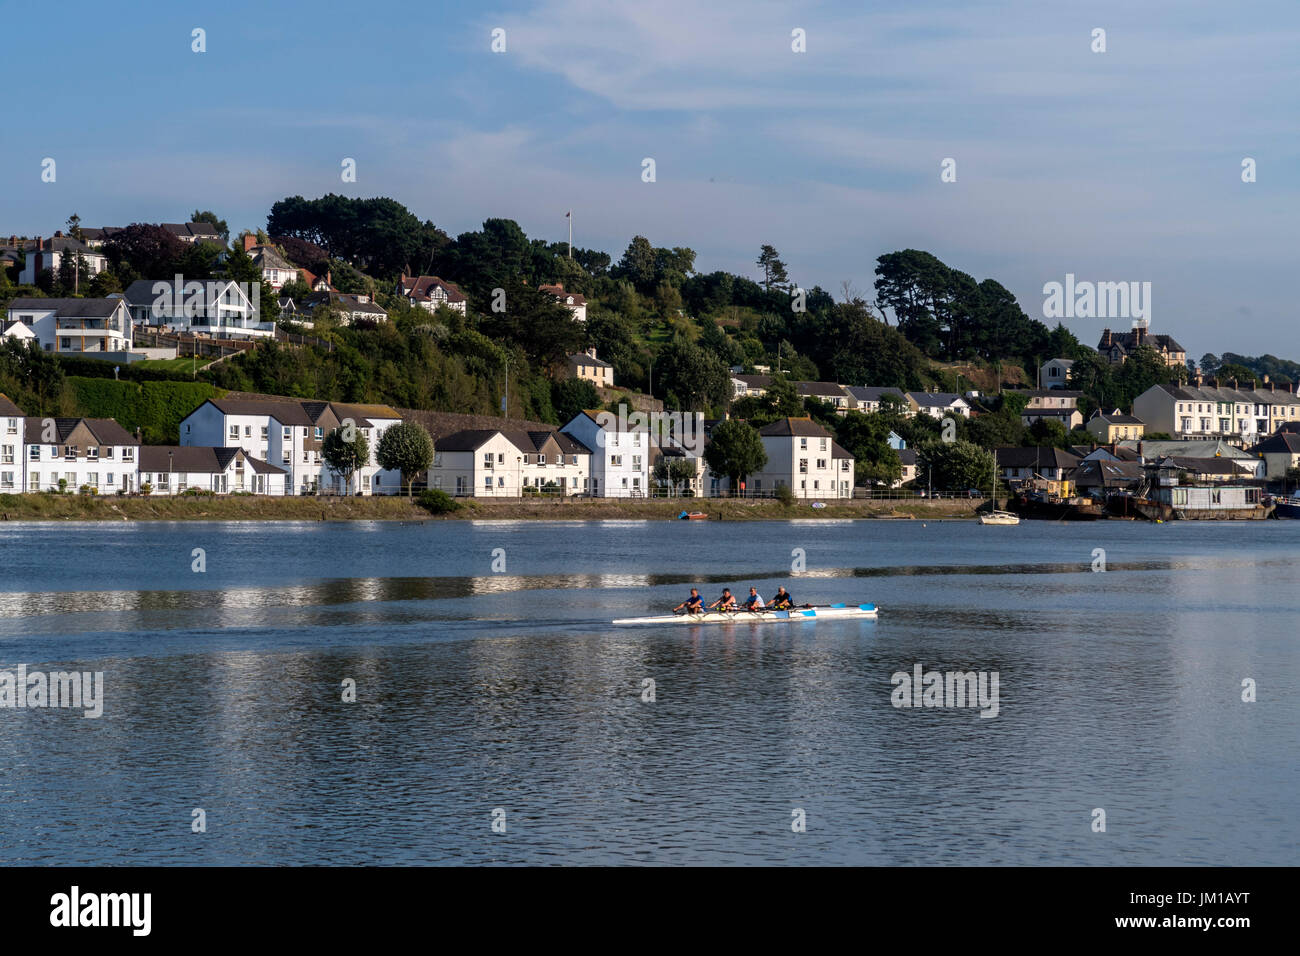 A coxless four row along  the River Torridge at Bideford, Devon. View looking across to East-The-Water. Rowing crew. Stock Photo